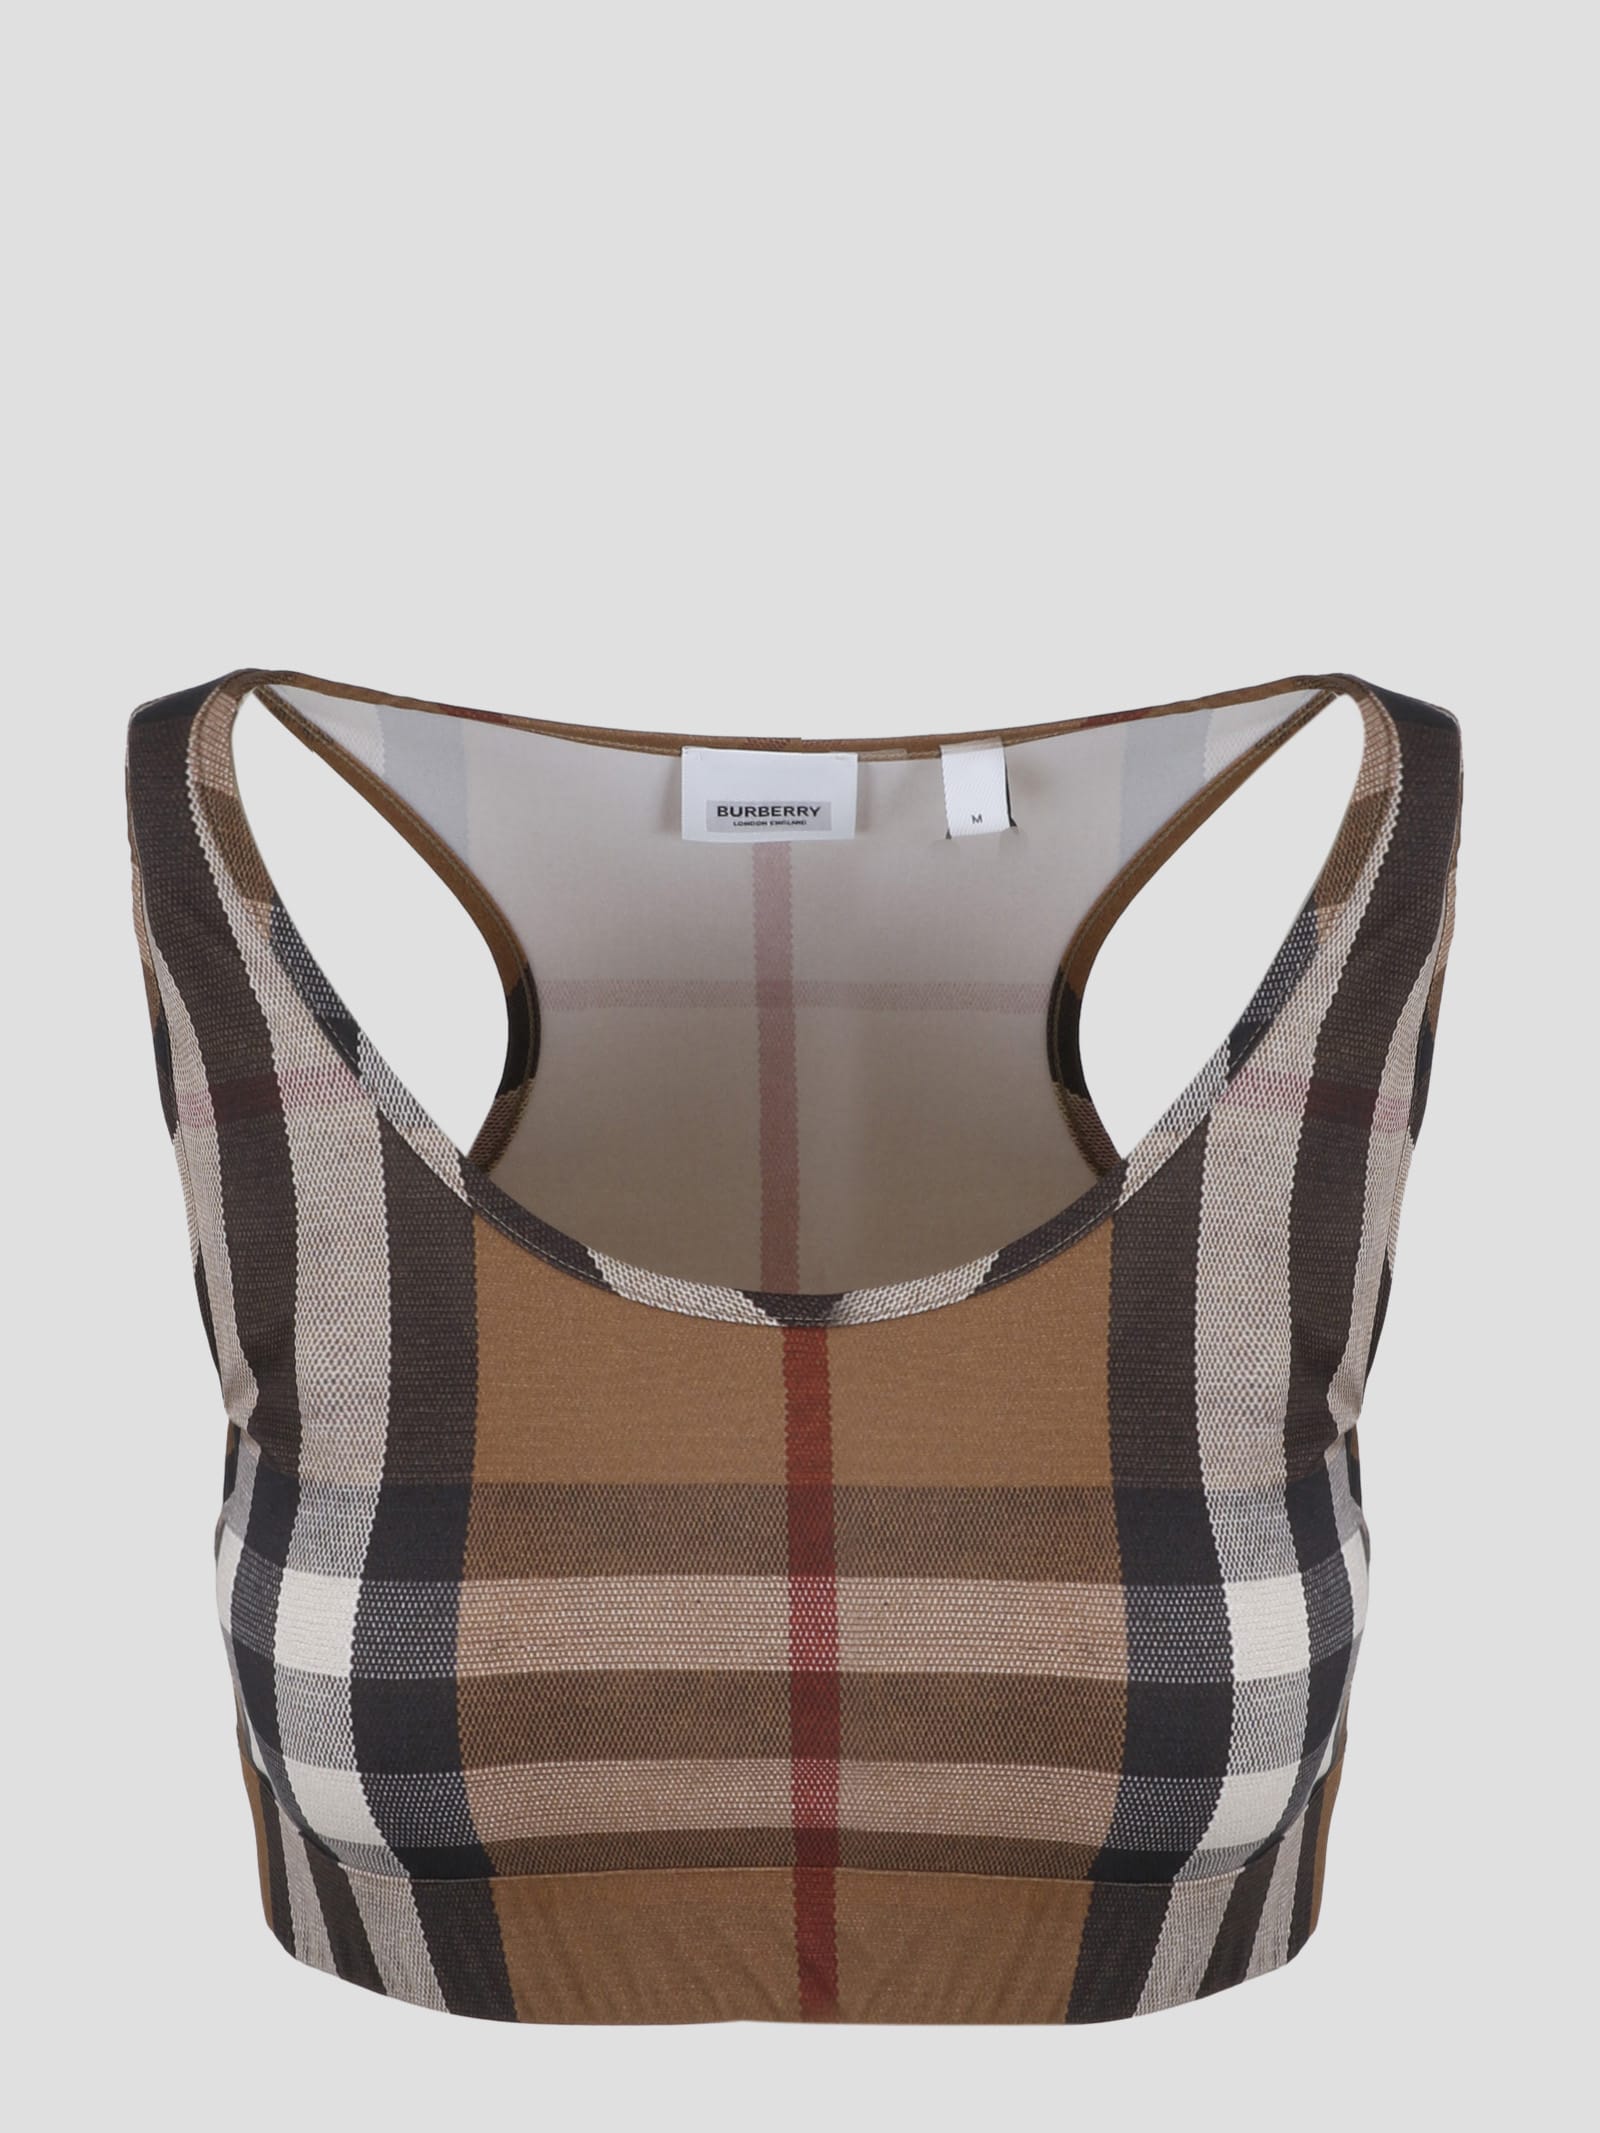 Burberry Immy Top